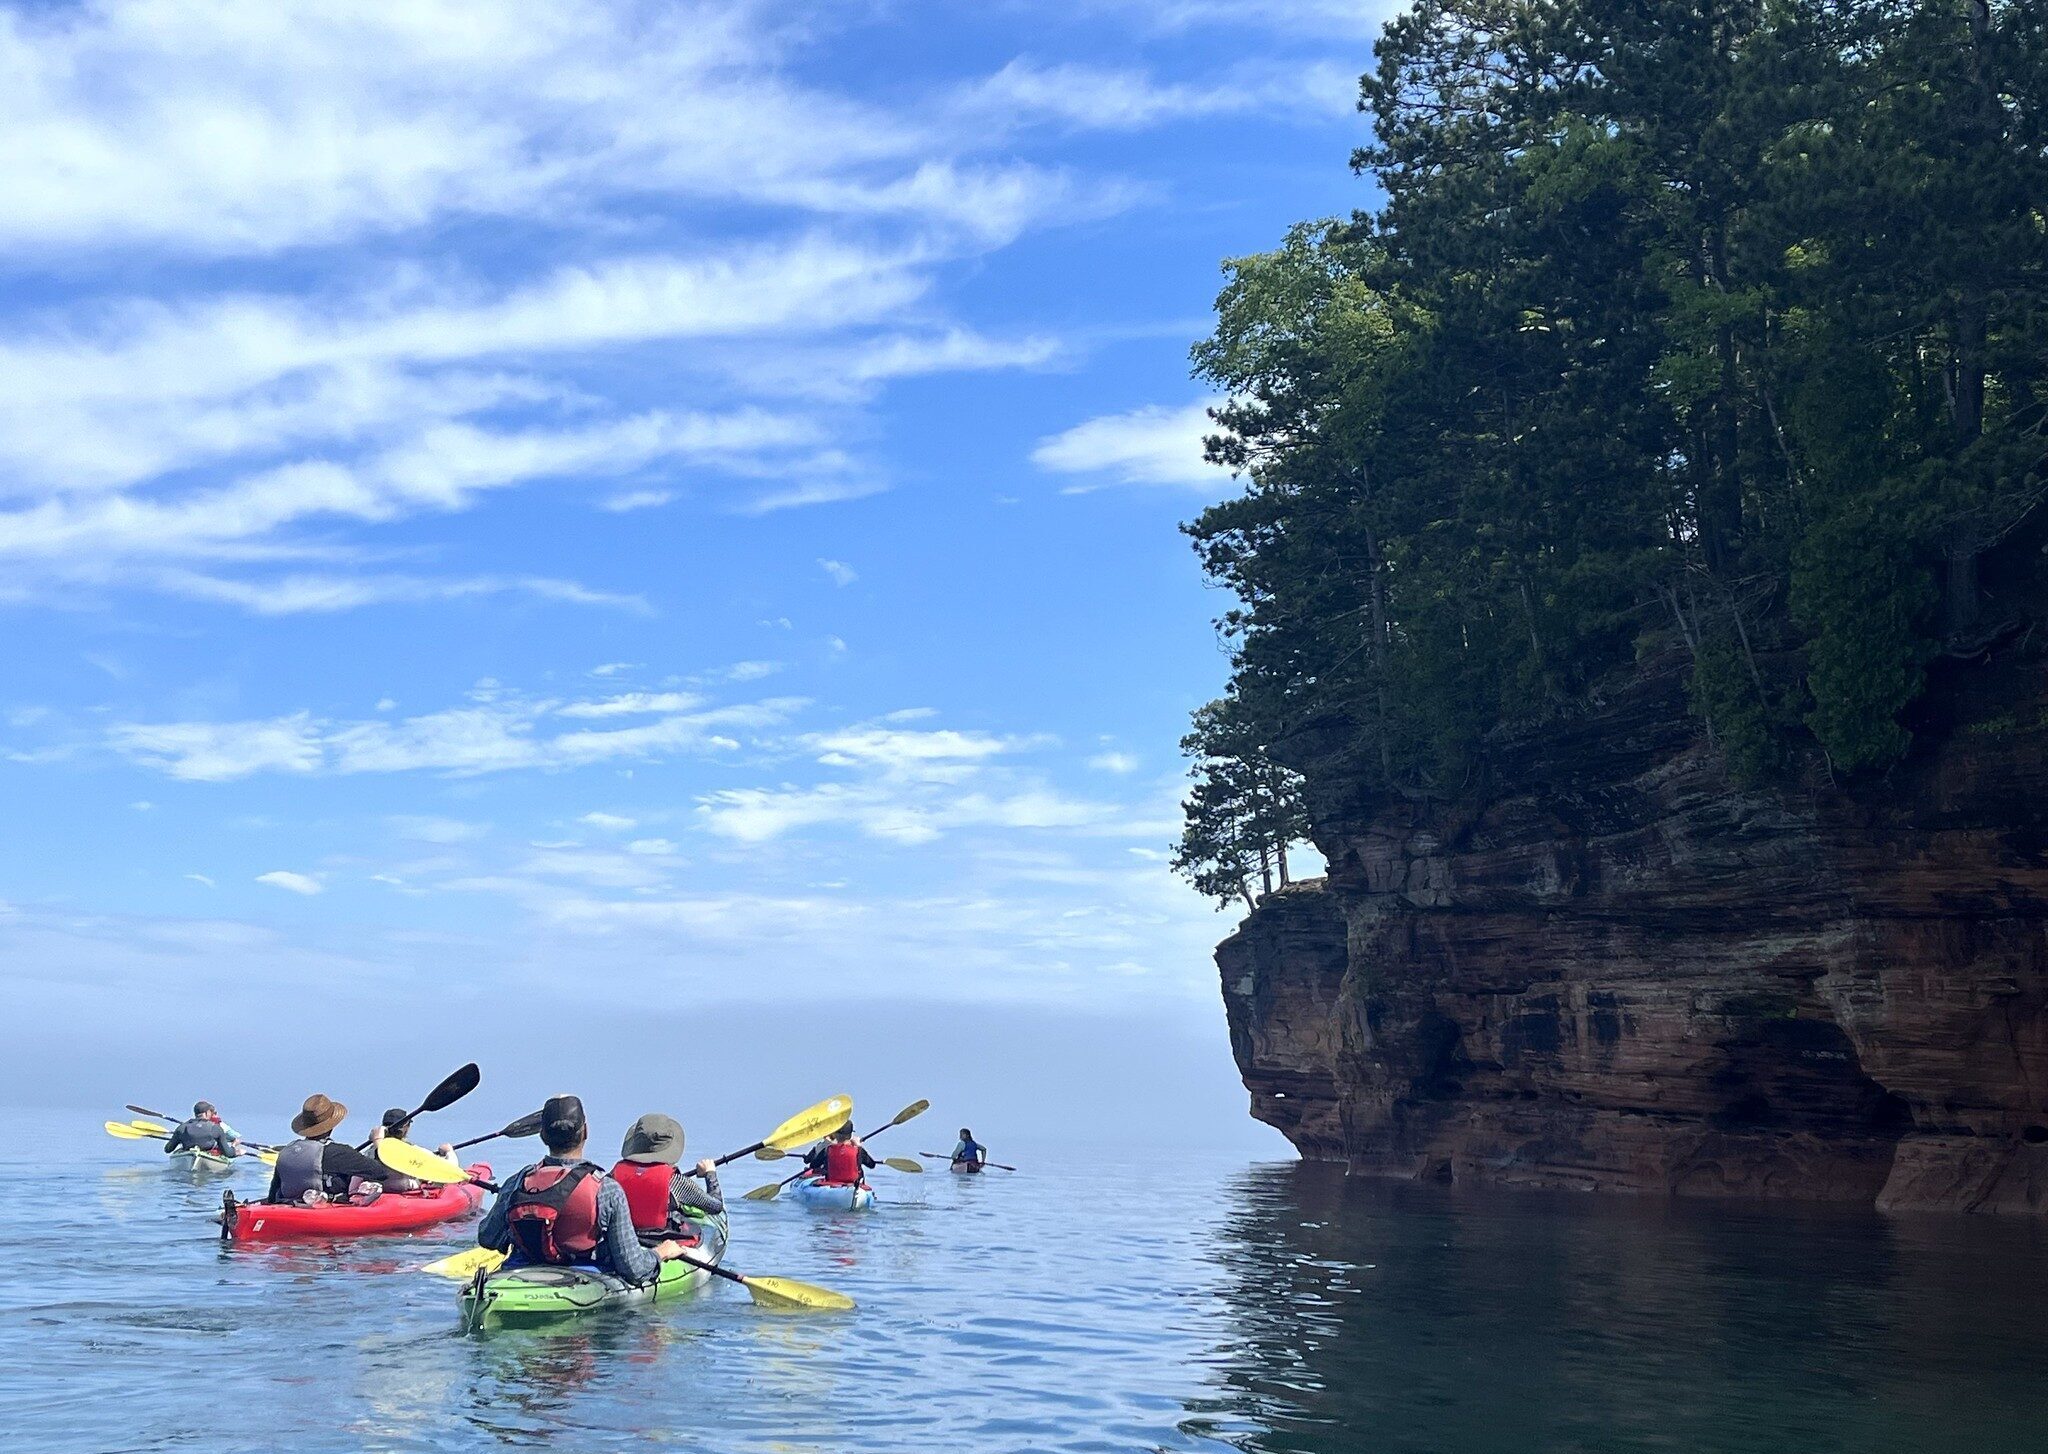 People kayaking on the water next to a piece of land and tall trees sticking out across the shore